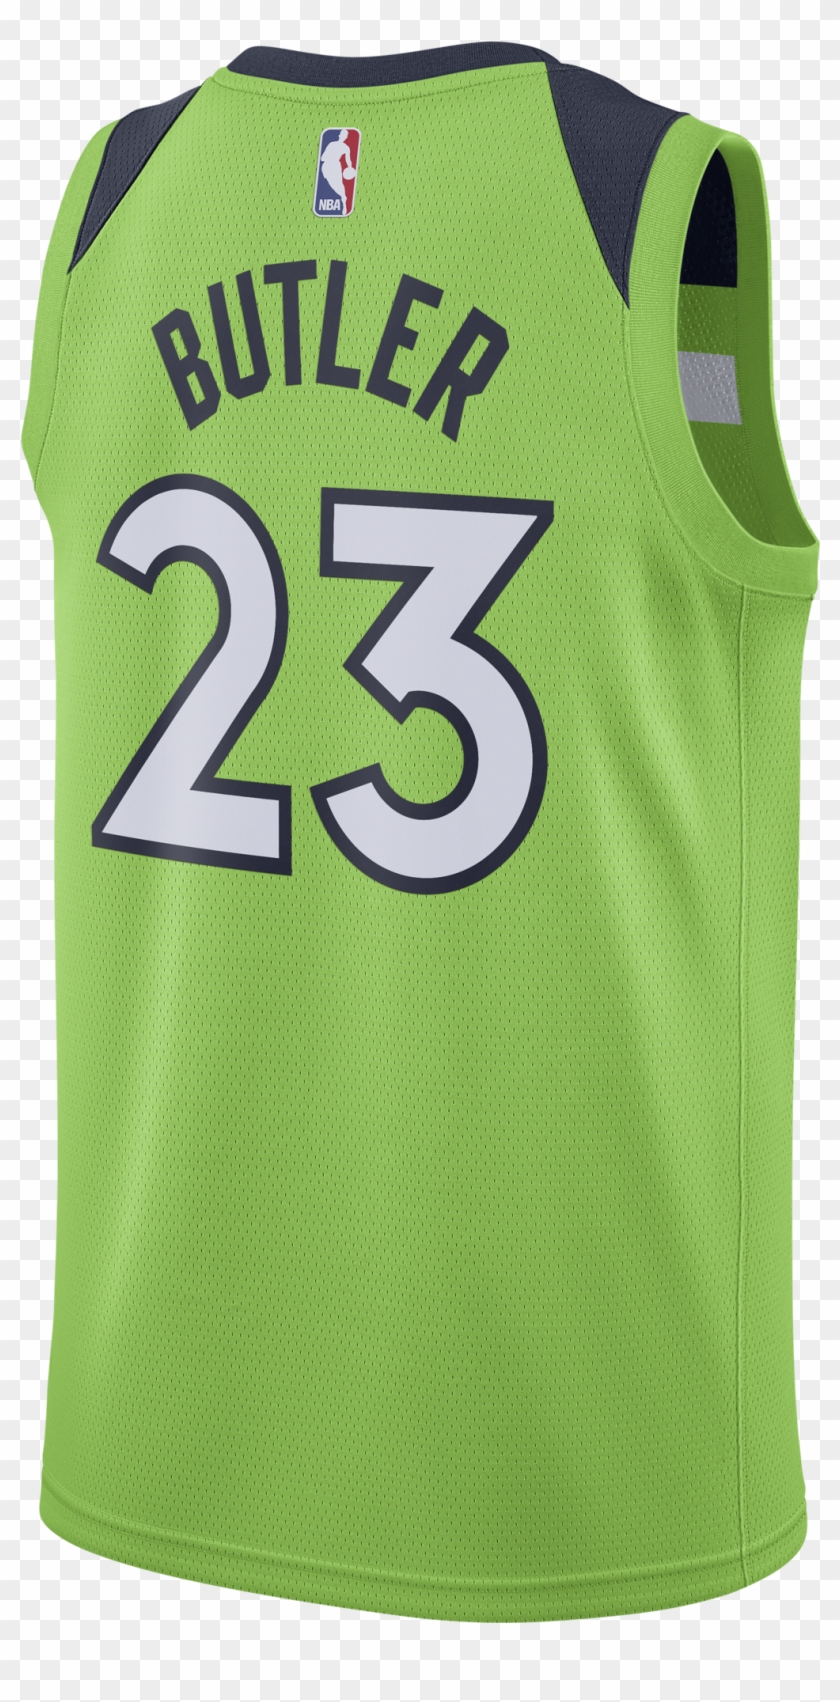 Previous Next - Sports Jersey Clipart